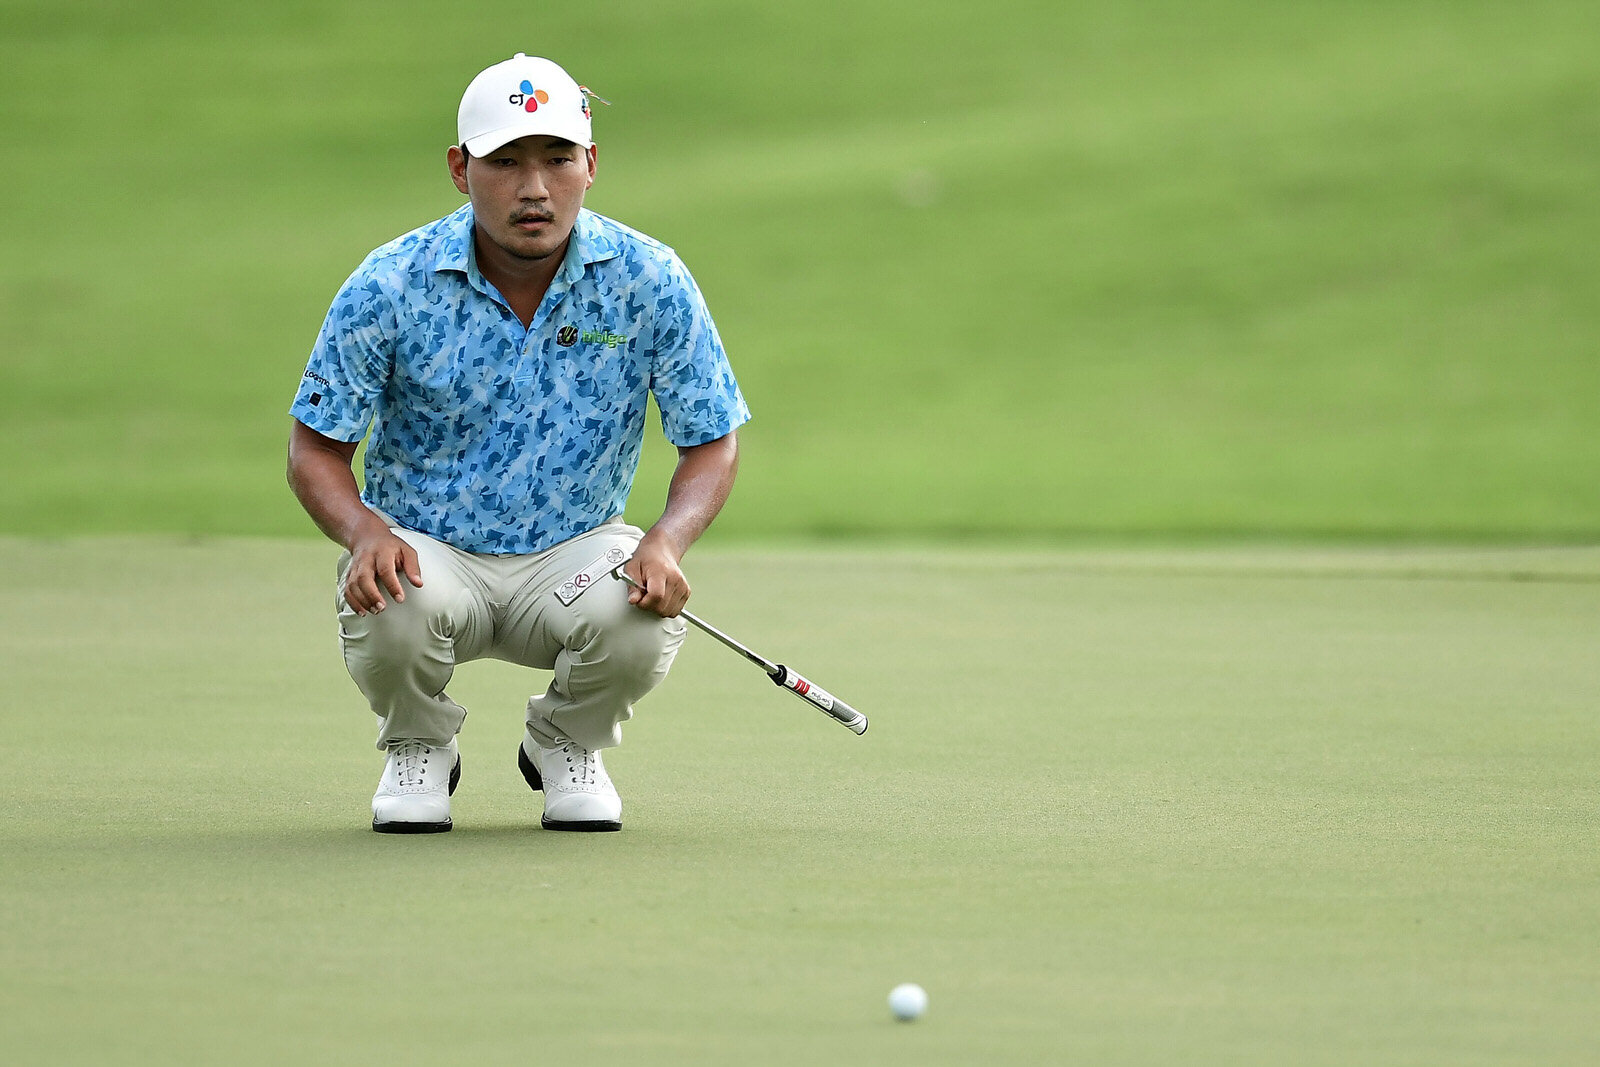  MEMPHIS, TENNESSEE - JULY 31: Sung Kang of Korea looks over a putt on the first green during the second round of the World Golf Championship-FedEx St Jude Invitational at TPC Southwind on July 31, 2020 in Memphis, Tennessee. (Photo by Stacy Revere/G